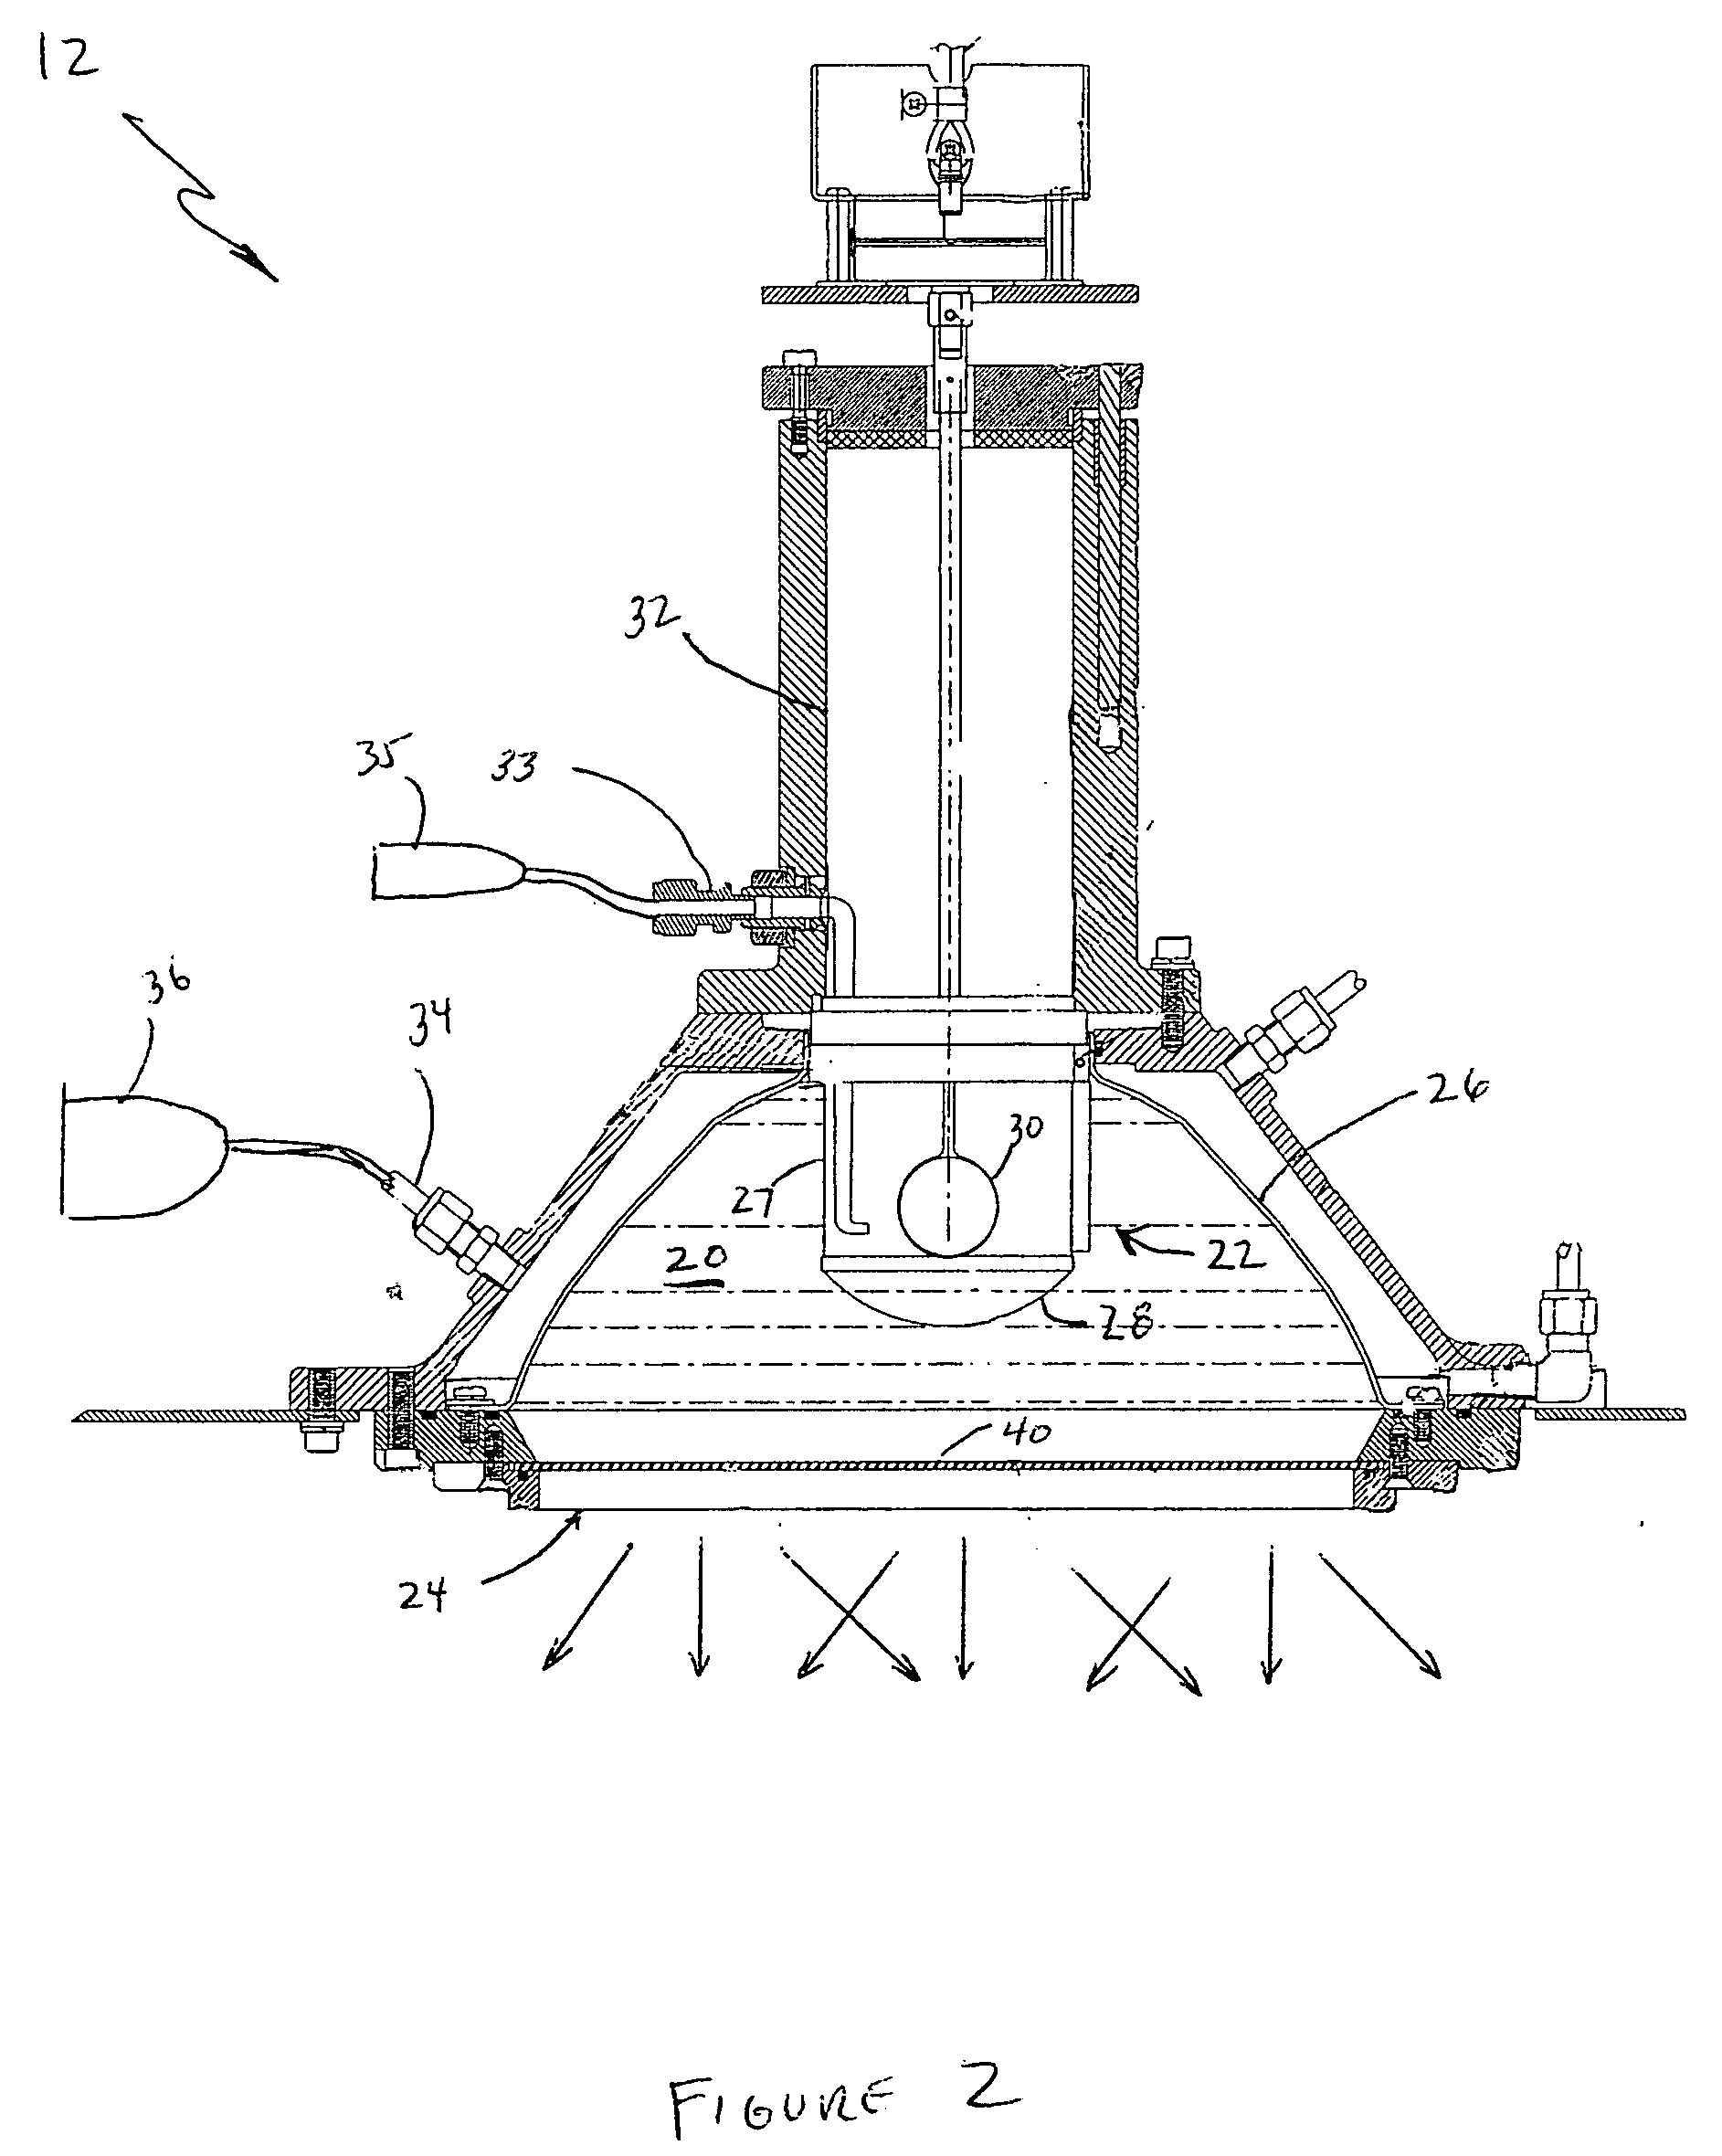 Apparatus and process for treating dielectric materials